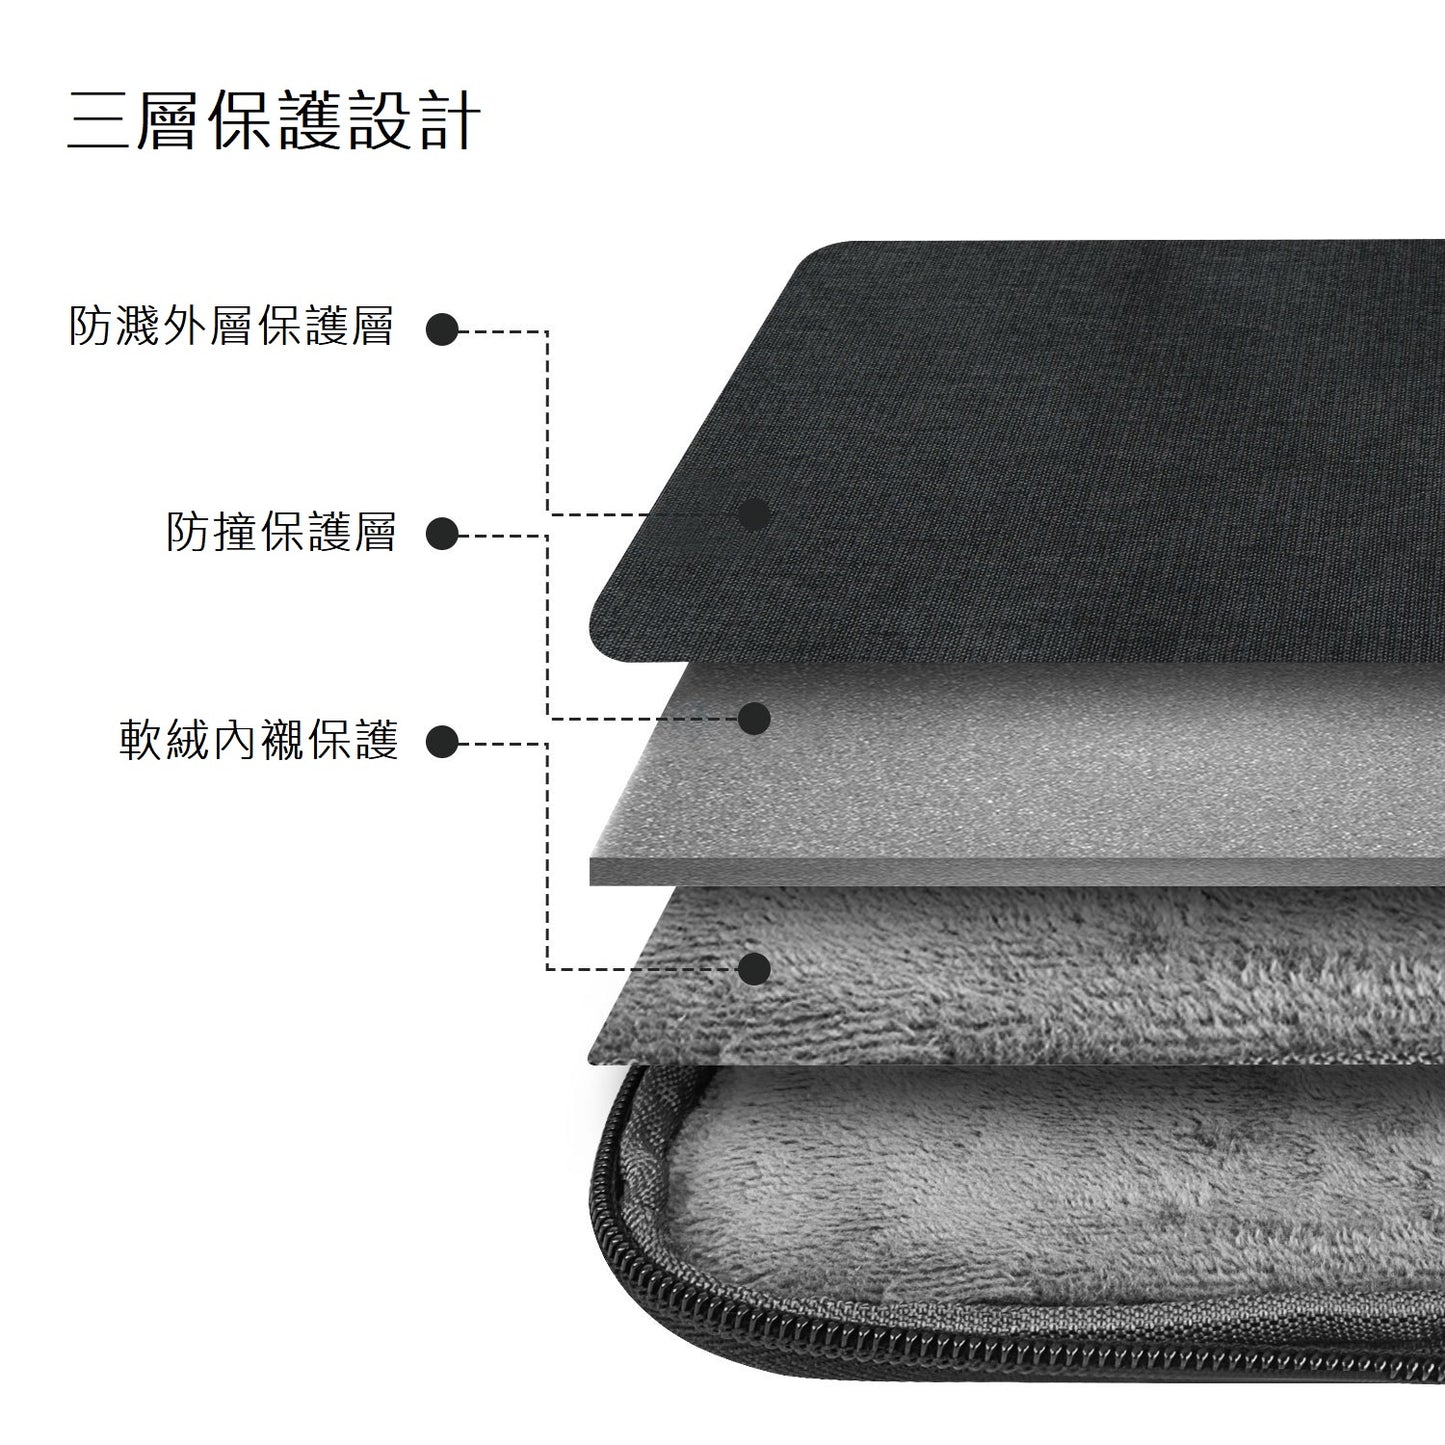 Portable laptop bag light and thin business unprinted 15.6 inch 13.3 inch inner bag multi-layer shockproof LTB-02